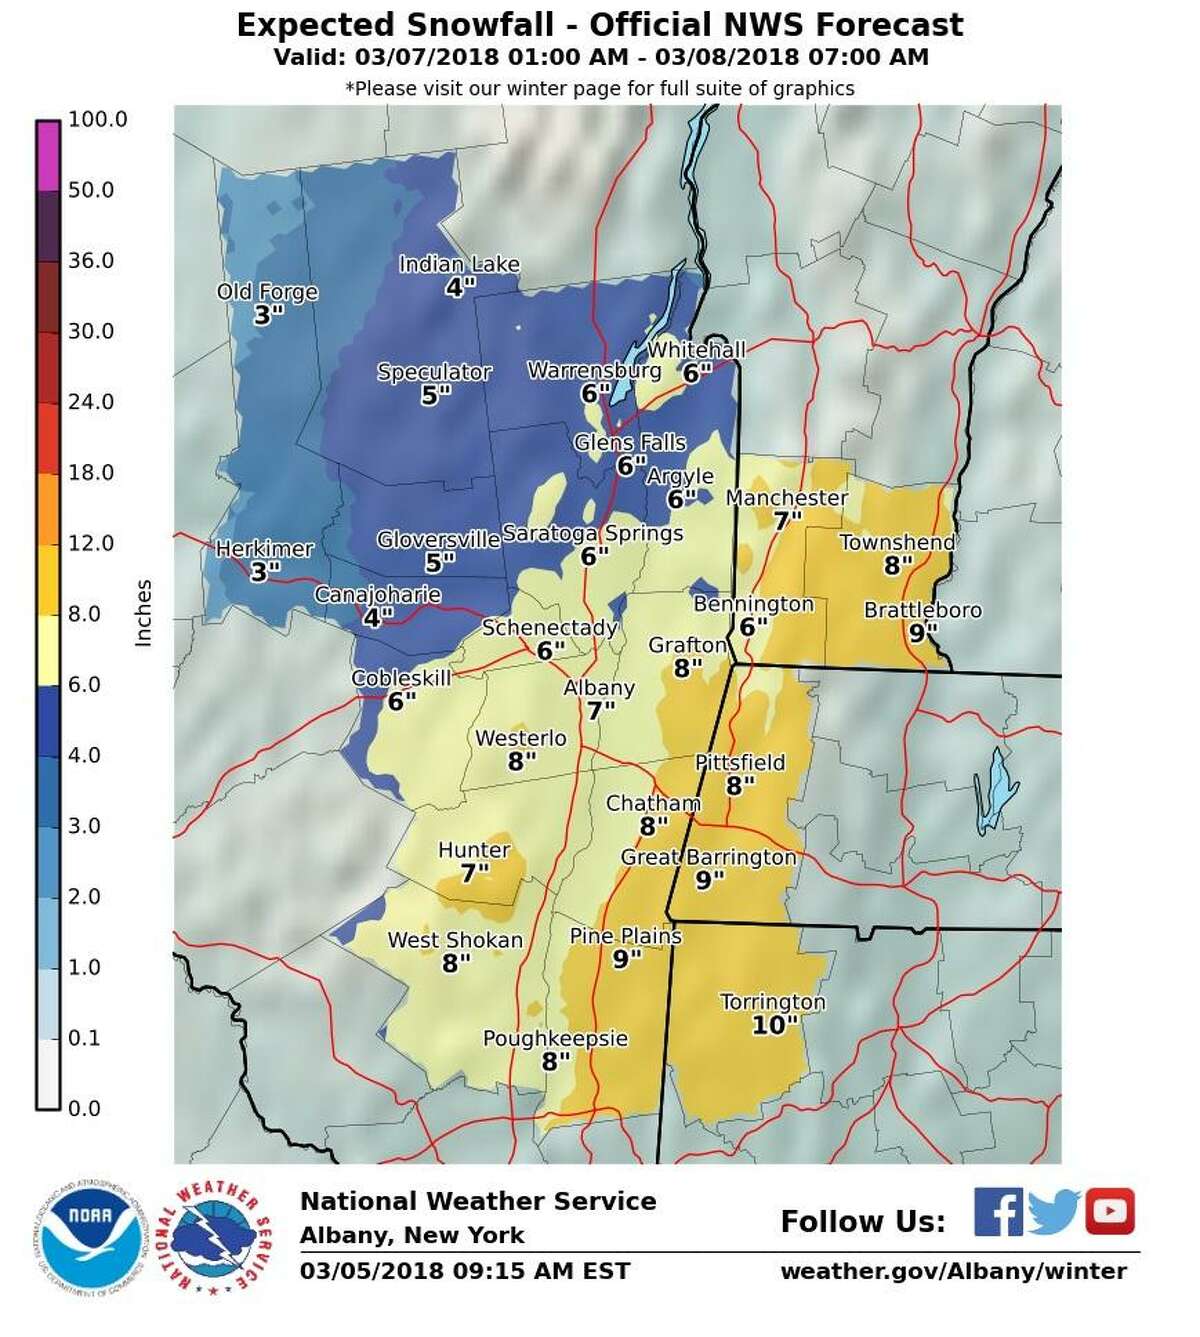 Connecticut is under a winter storm watch with the possibility of a foot of snow from a nor’easter on Wednesday, March 7.